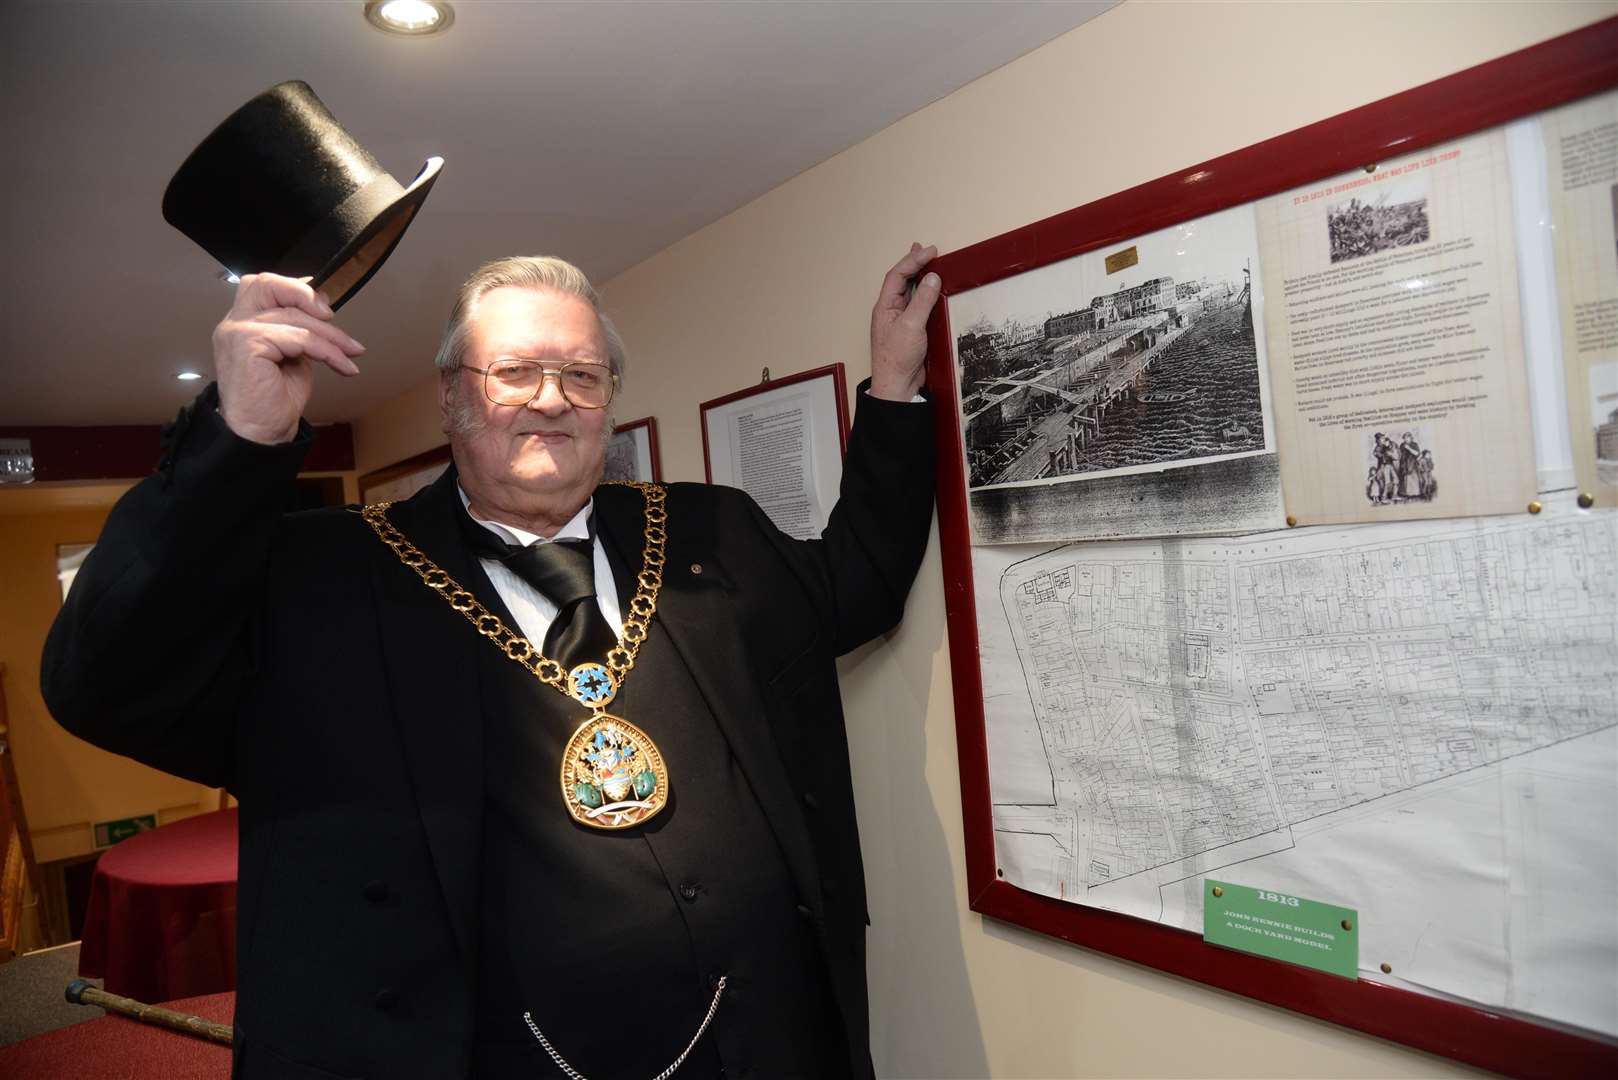 Mayor of Swale Cllr Ken Ingleton at the launch of the Charles Dickens Exhibition at the Criterion Theatre in Blue Town on Thursday. Picture: Chris Davey